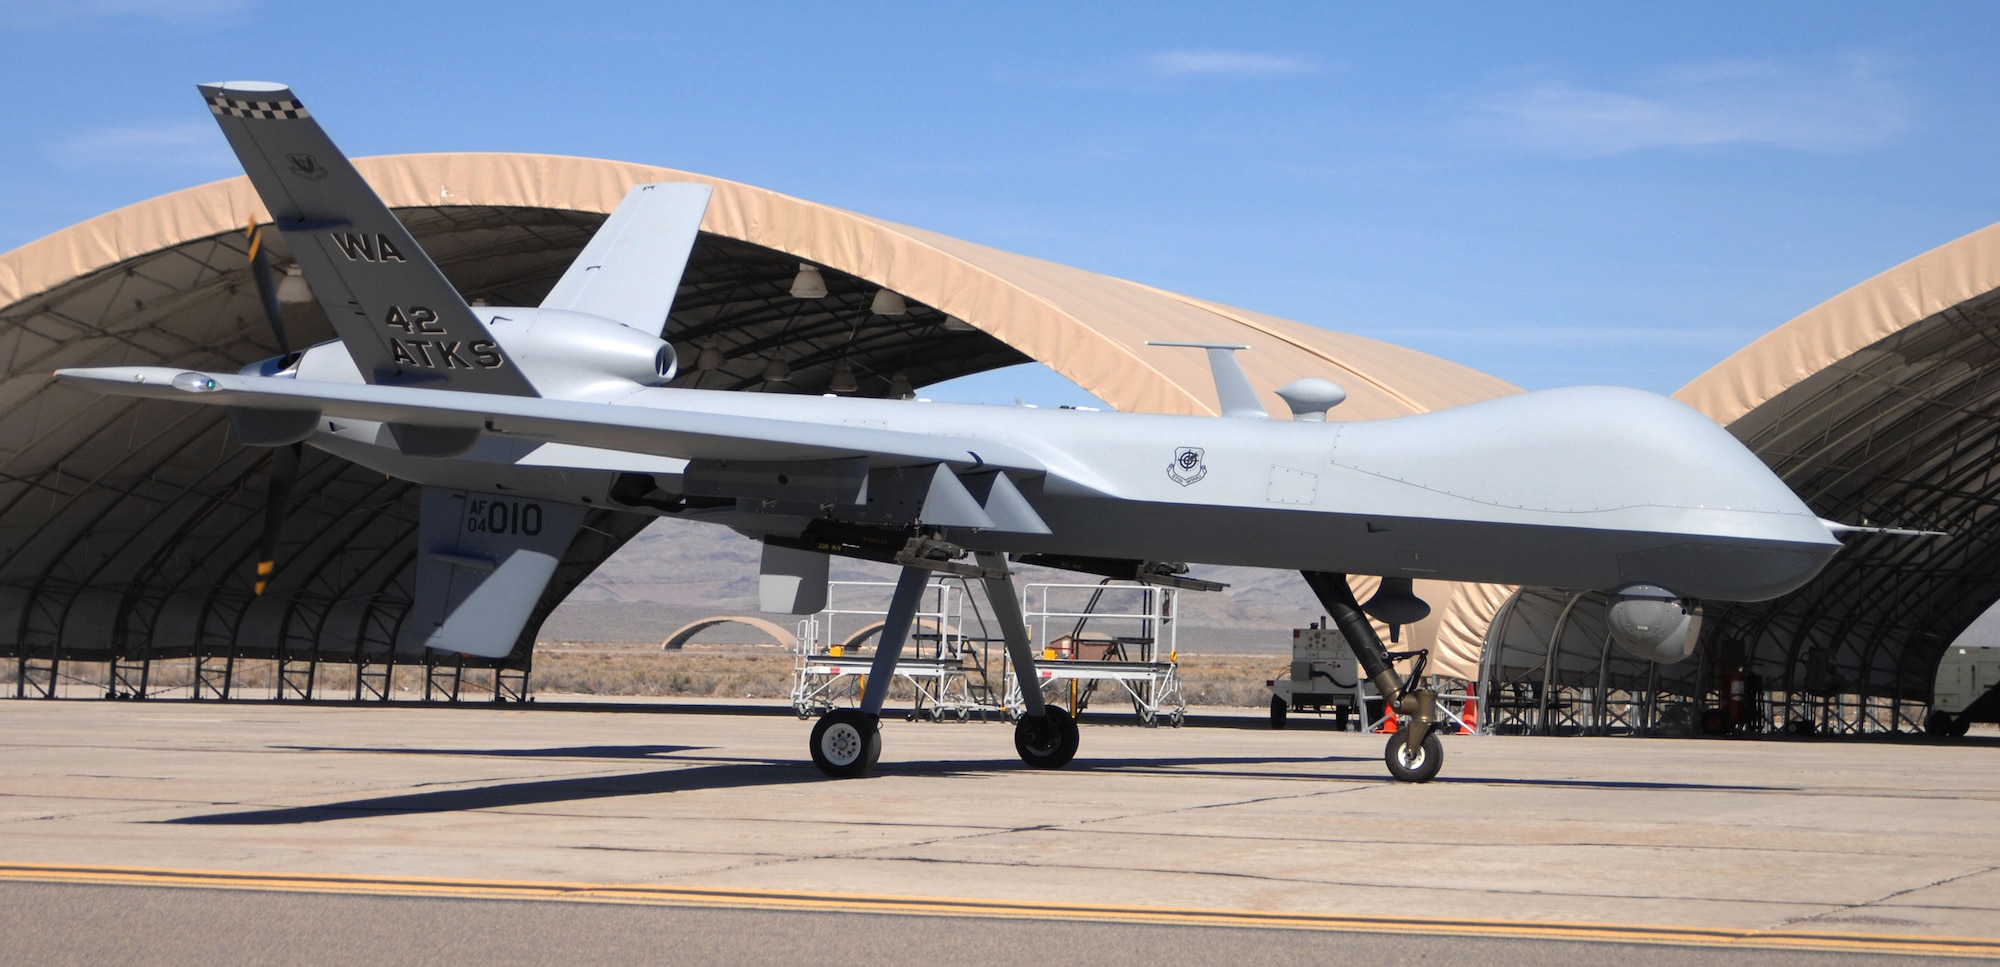 The MQ-9 Reaper taxies into Creech Air Force Base, Nev., home to the newly reactivated 432nd Wing. The 432nd Wing consists of six operations squadrons and a maintenance squadron for the Air Force fleet of 60 MQ-1 Predator and six MQ-9 Reaper unmanned aerial vehicles. (U.S. Air Force photo/Senior Airman Larry E. Reid Jr.)